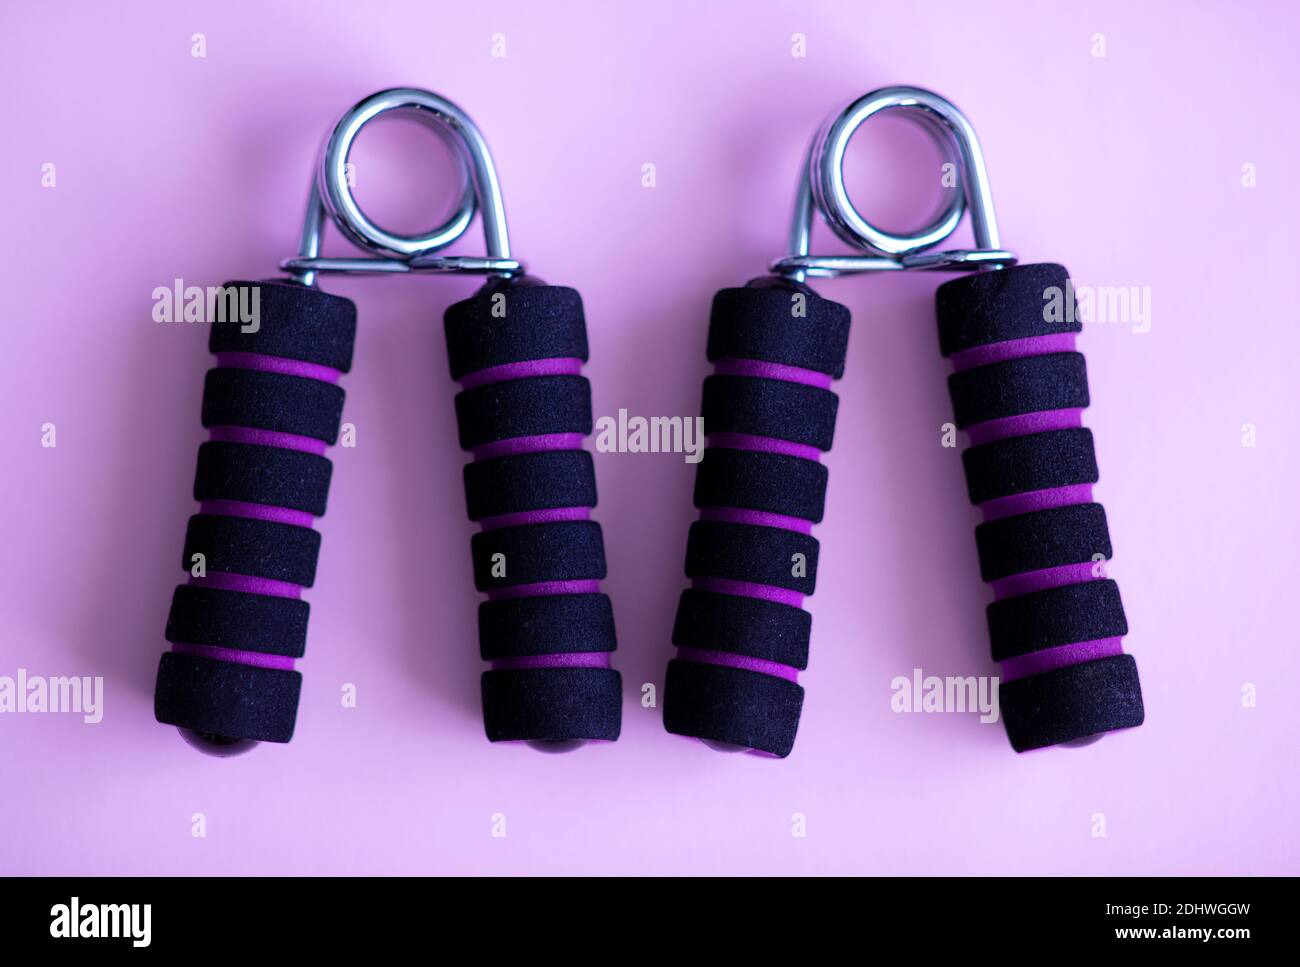 Hand grip strengthener for hand exerciser on a purple background Stock Photo